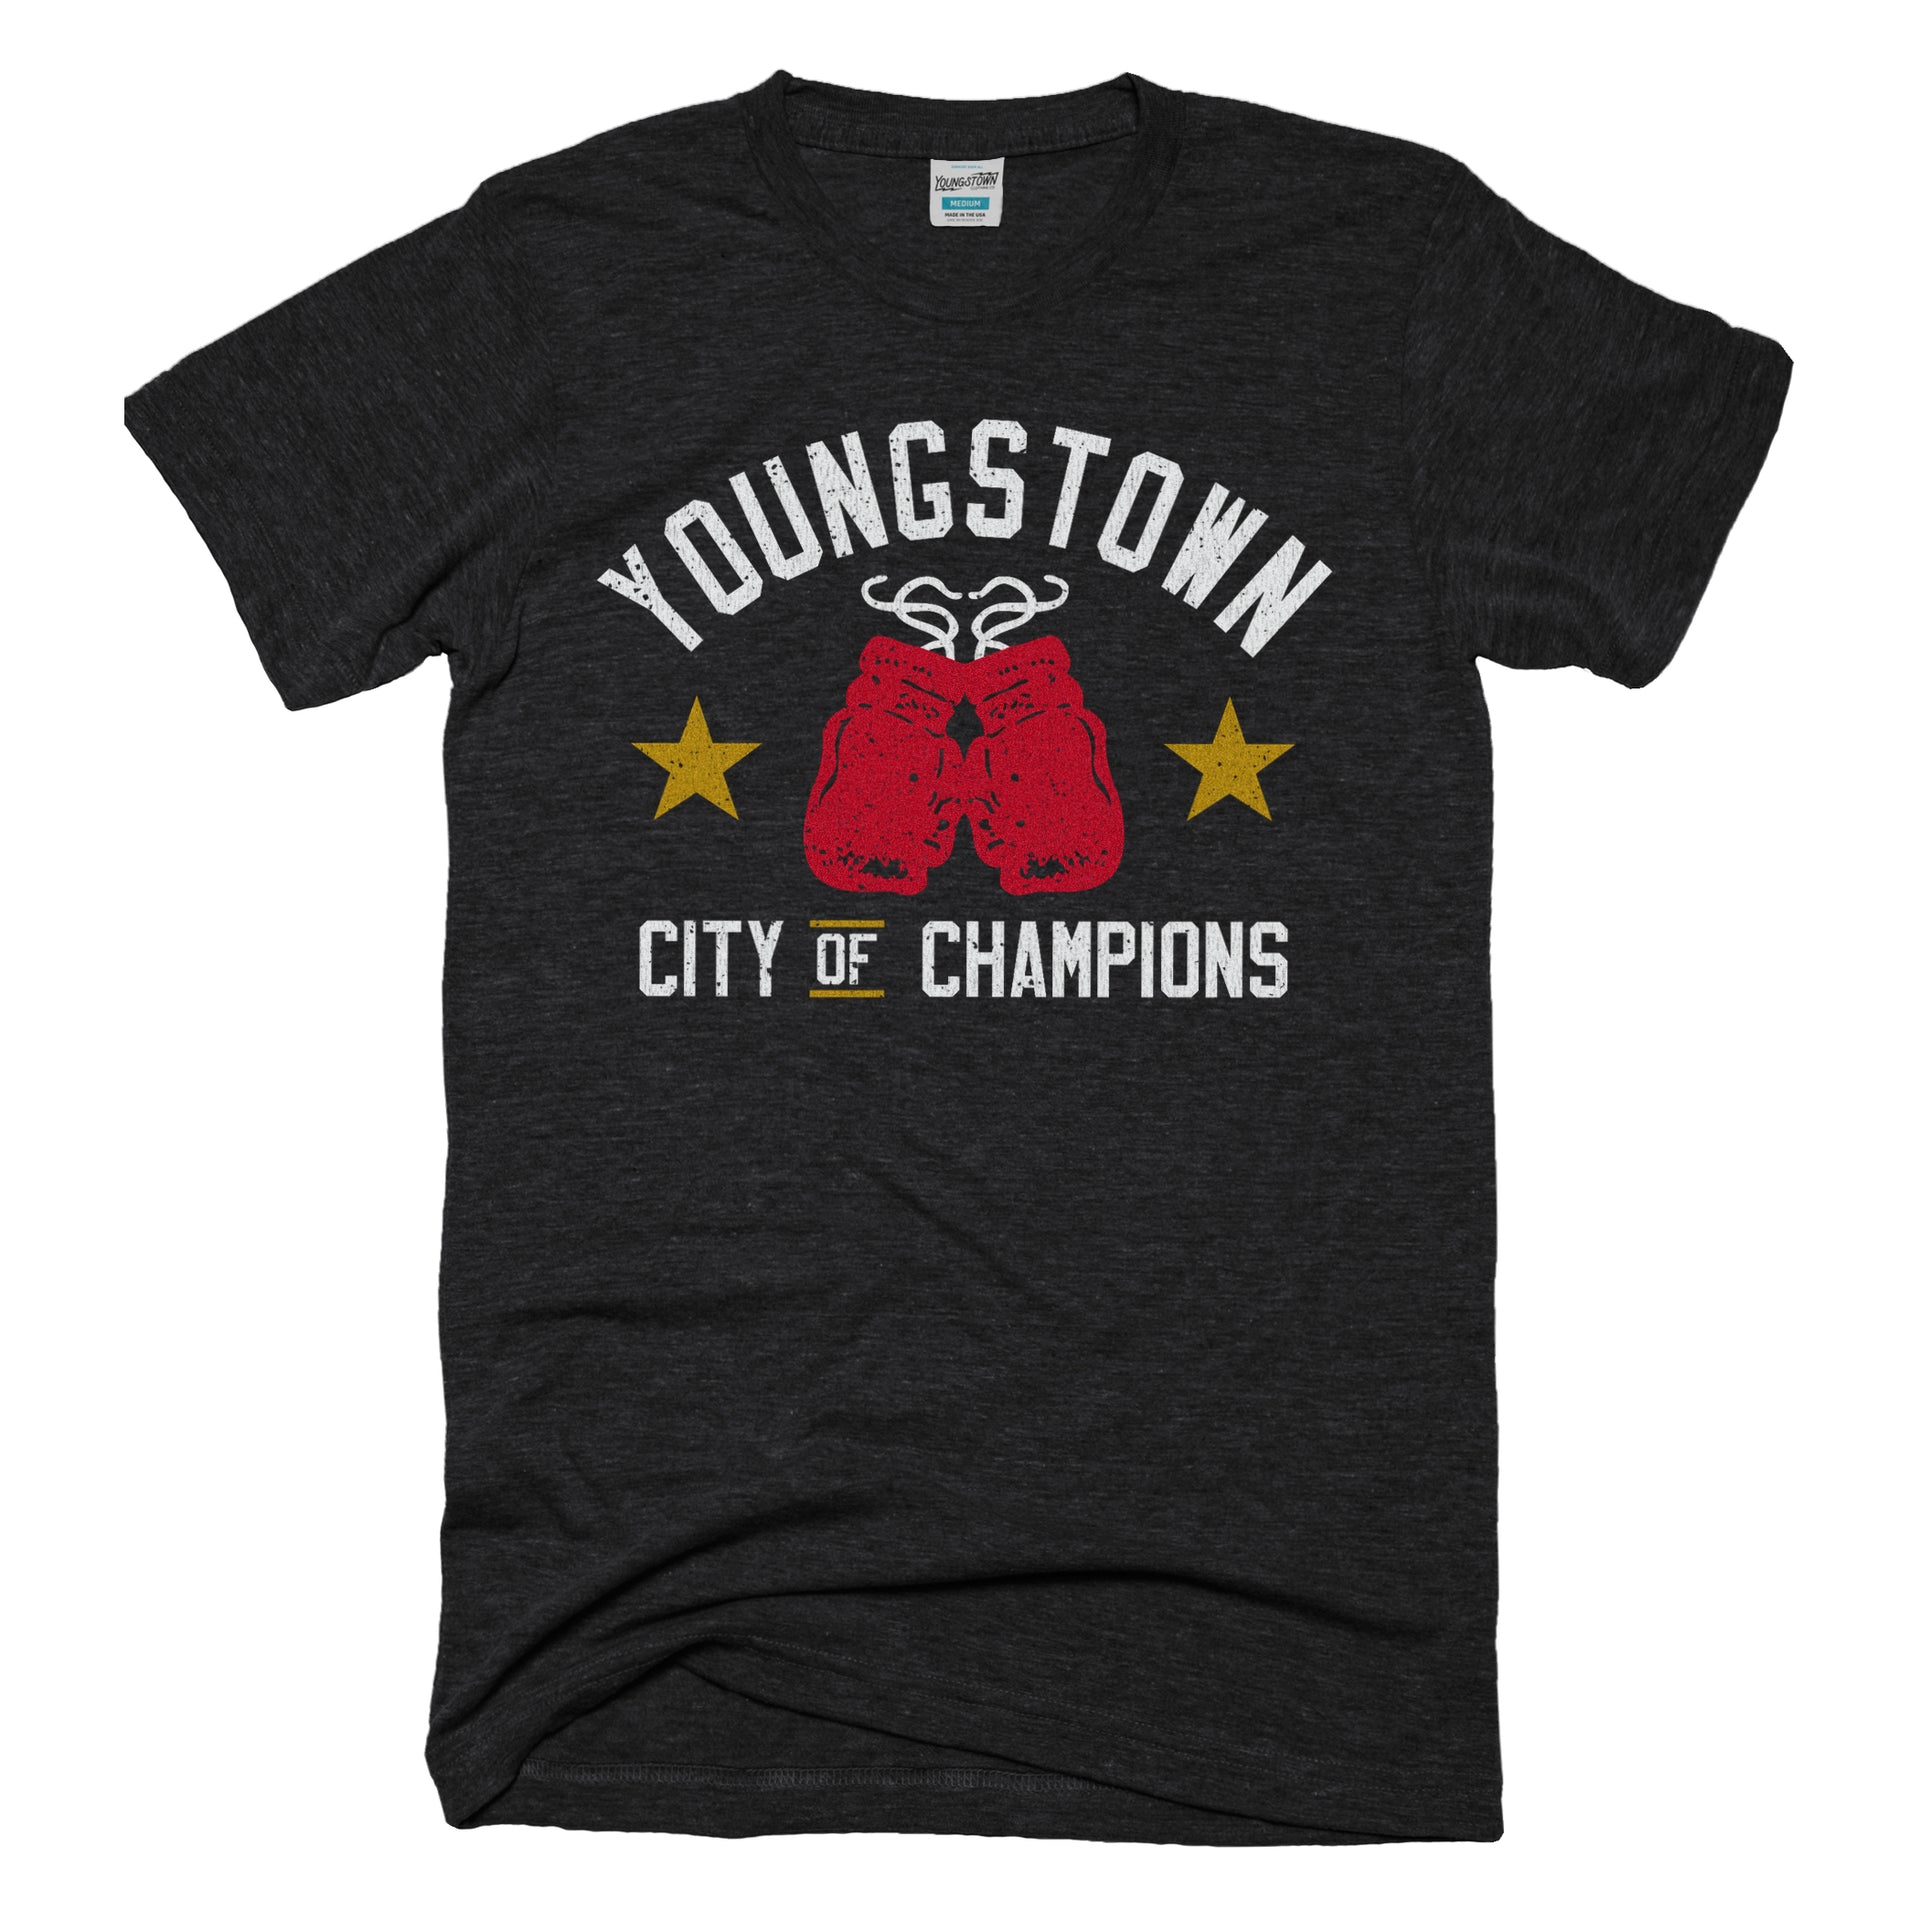 Youngstown City of Champions T-Shirt